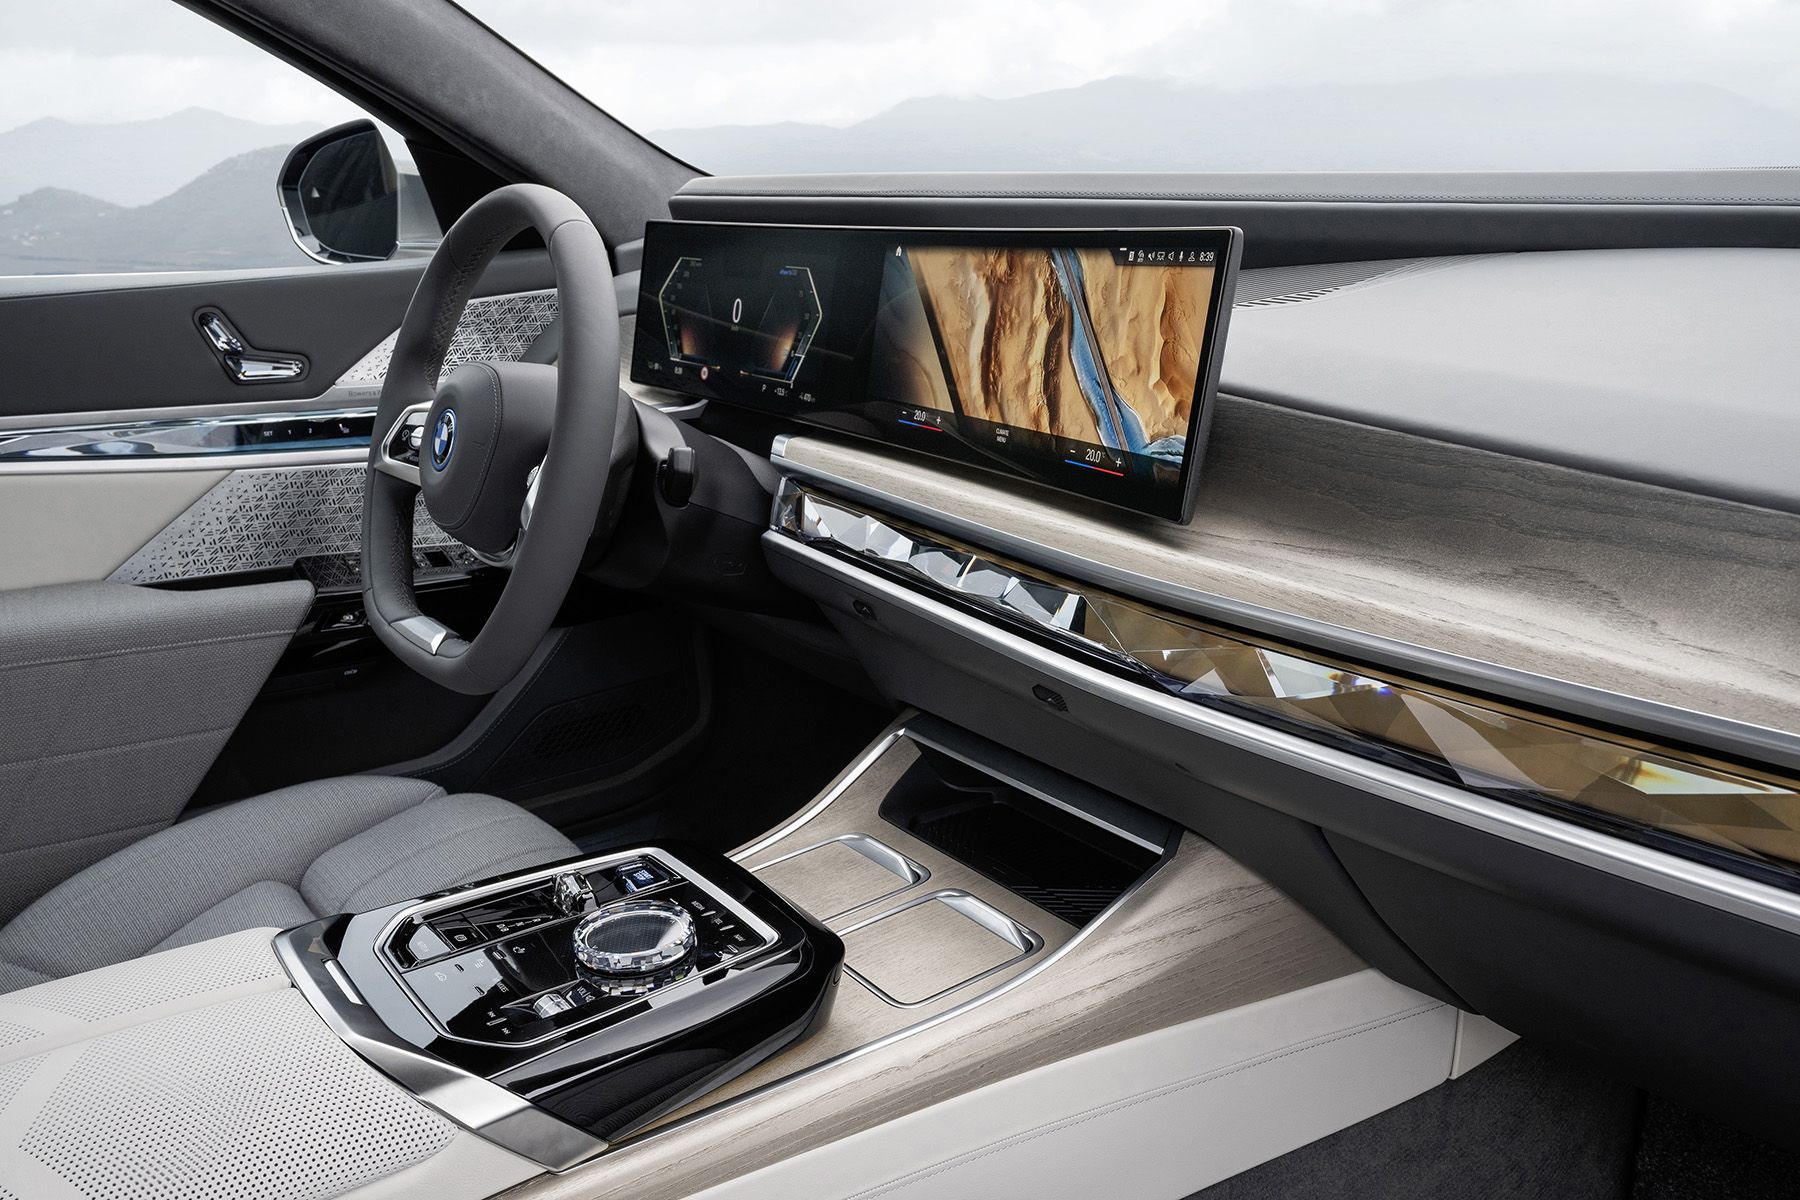 Electrified vehicles dominate Wards 10 Best Interiors Driving